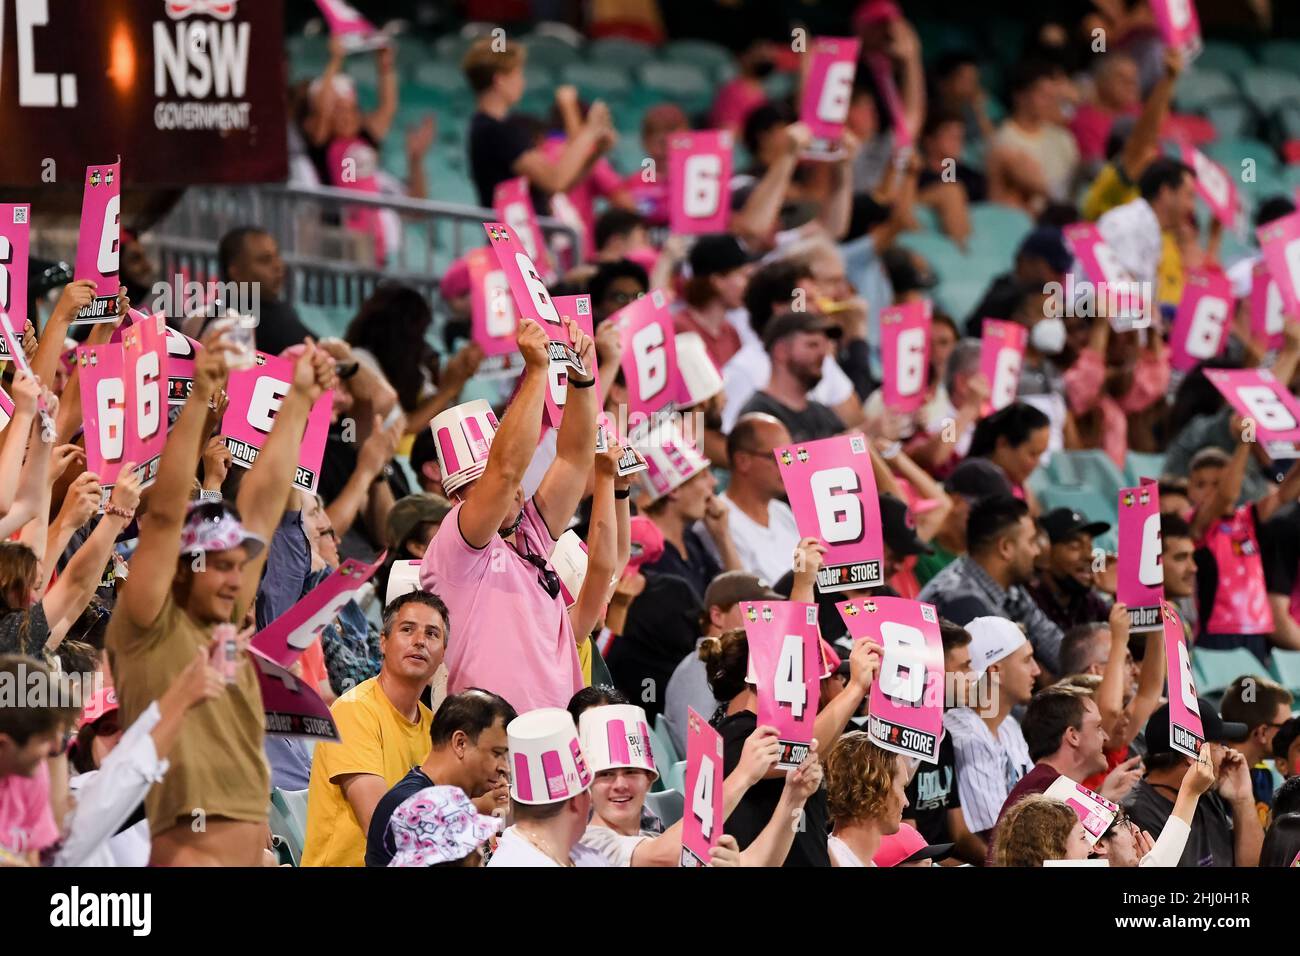 Sydney, Australia, 26 January, 2022. Fans cheer during the Big Bash League Challenger cricket match between Sydney Sixers and Adelaide Strikers at The Sydney Cricket Ground on January 26, 2022 in Sydney, Australia. Credit: Steven Markham/Speed Media/Alamy Live News Stock Photo